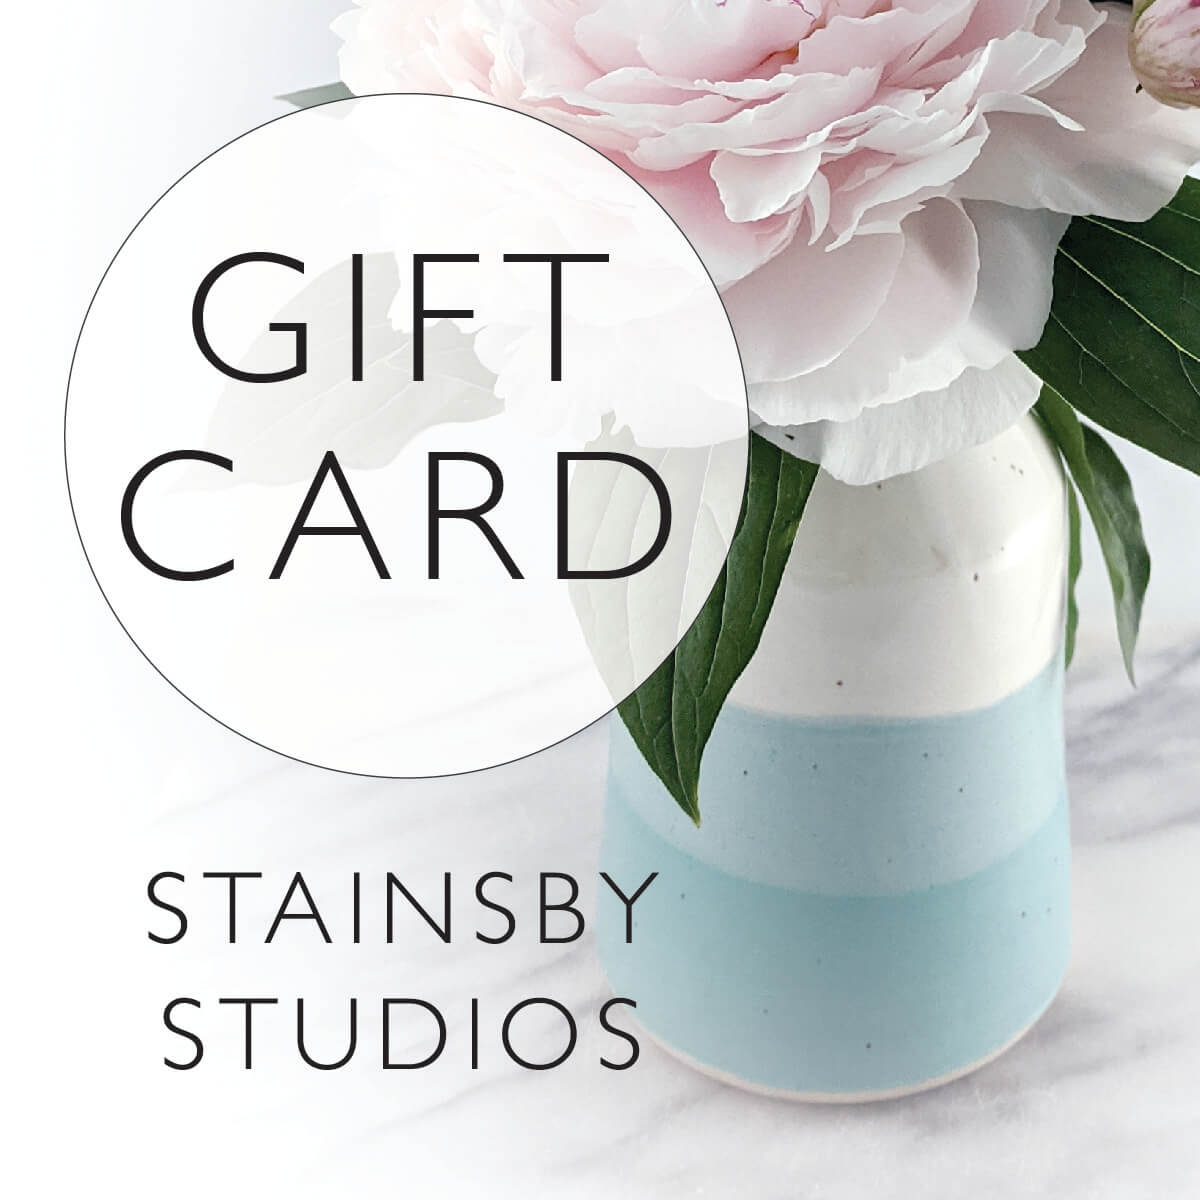 White and turquoise vase holding a pink peony with the words Gift Card in a circle and Stainsby Studios written below